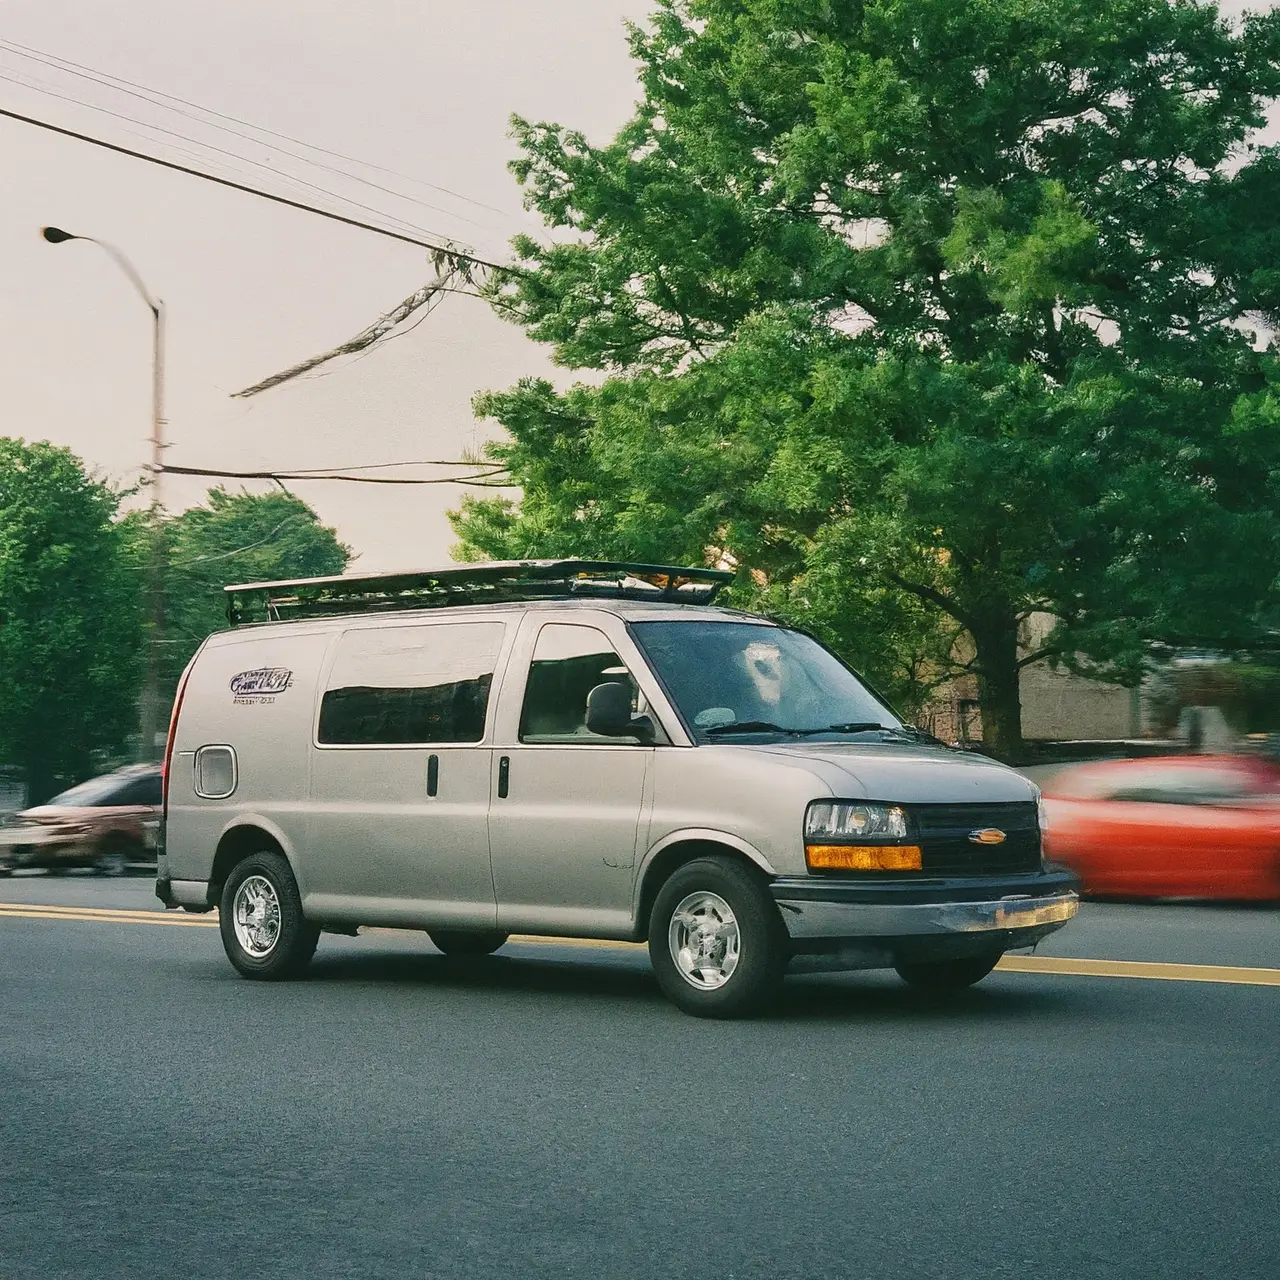 A wheelchair accessible van driving through Clifton, New Jersey. 35mm stock photo